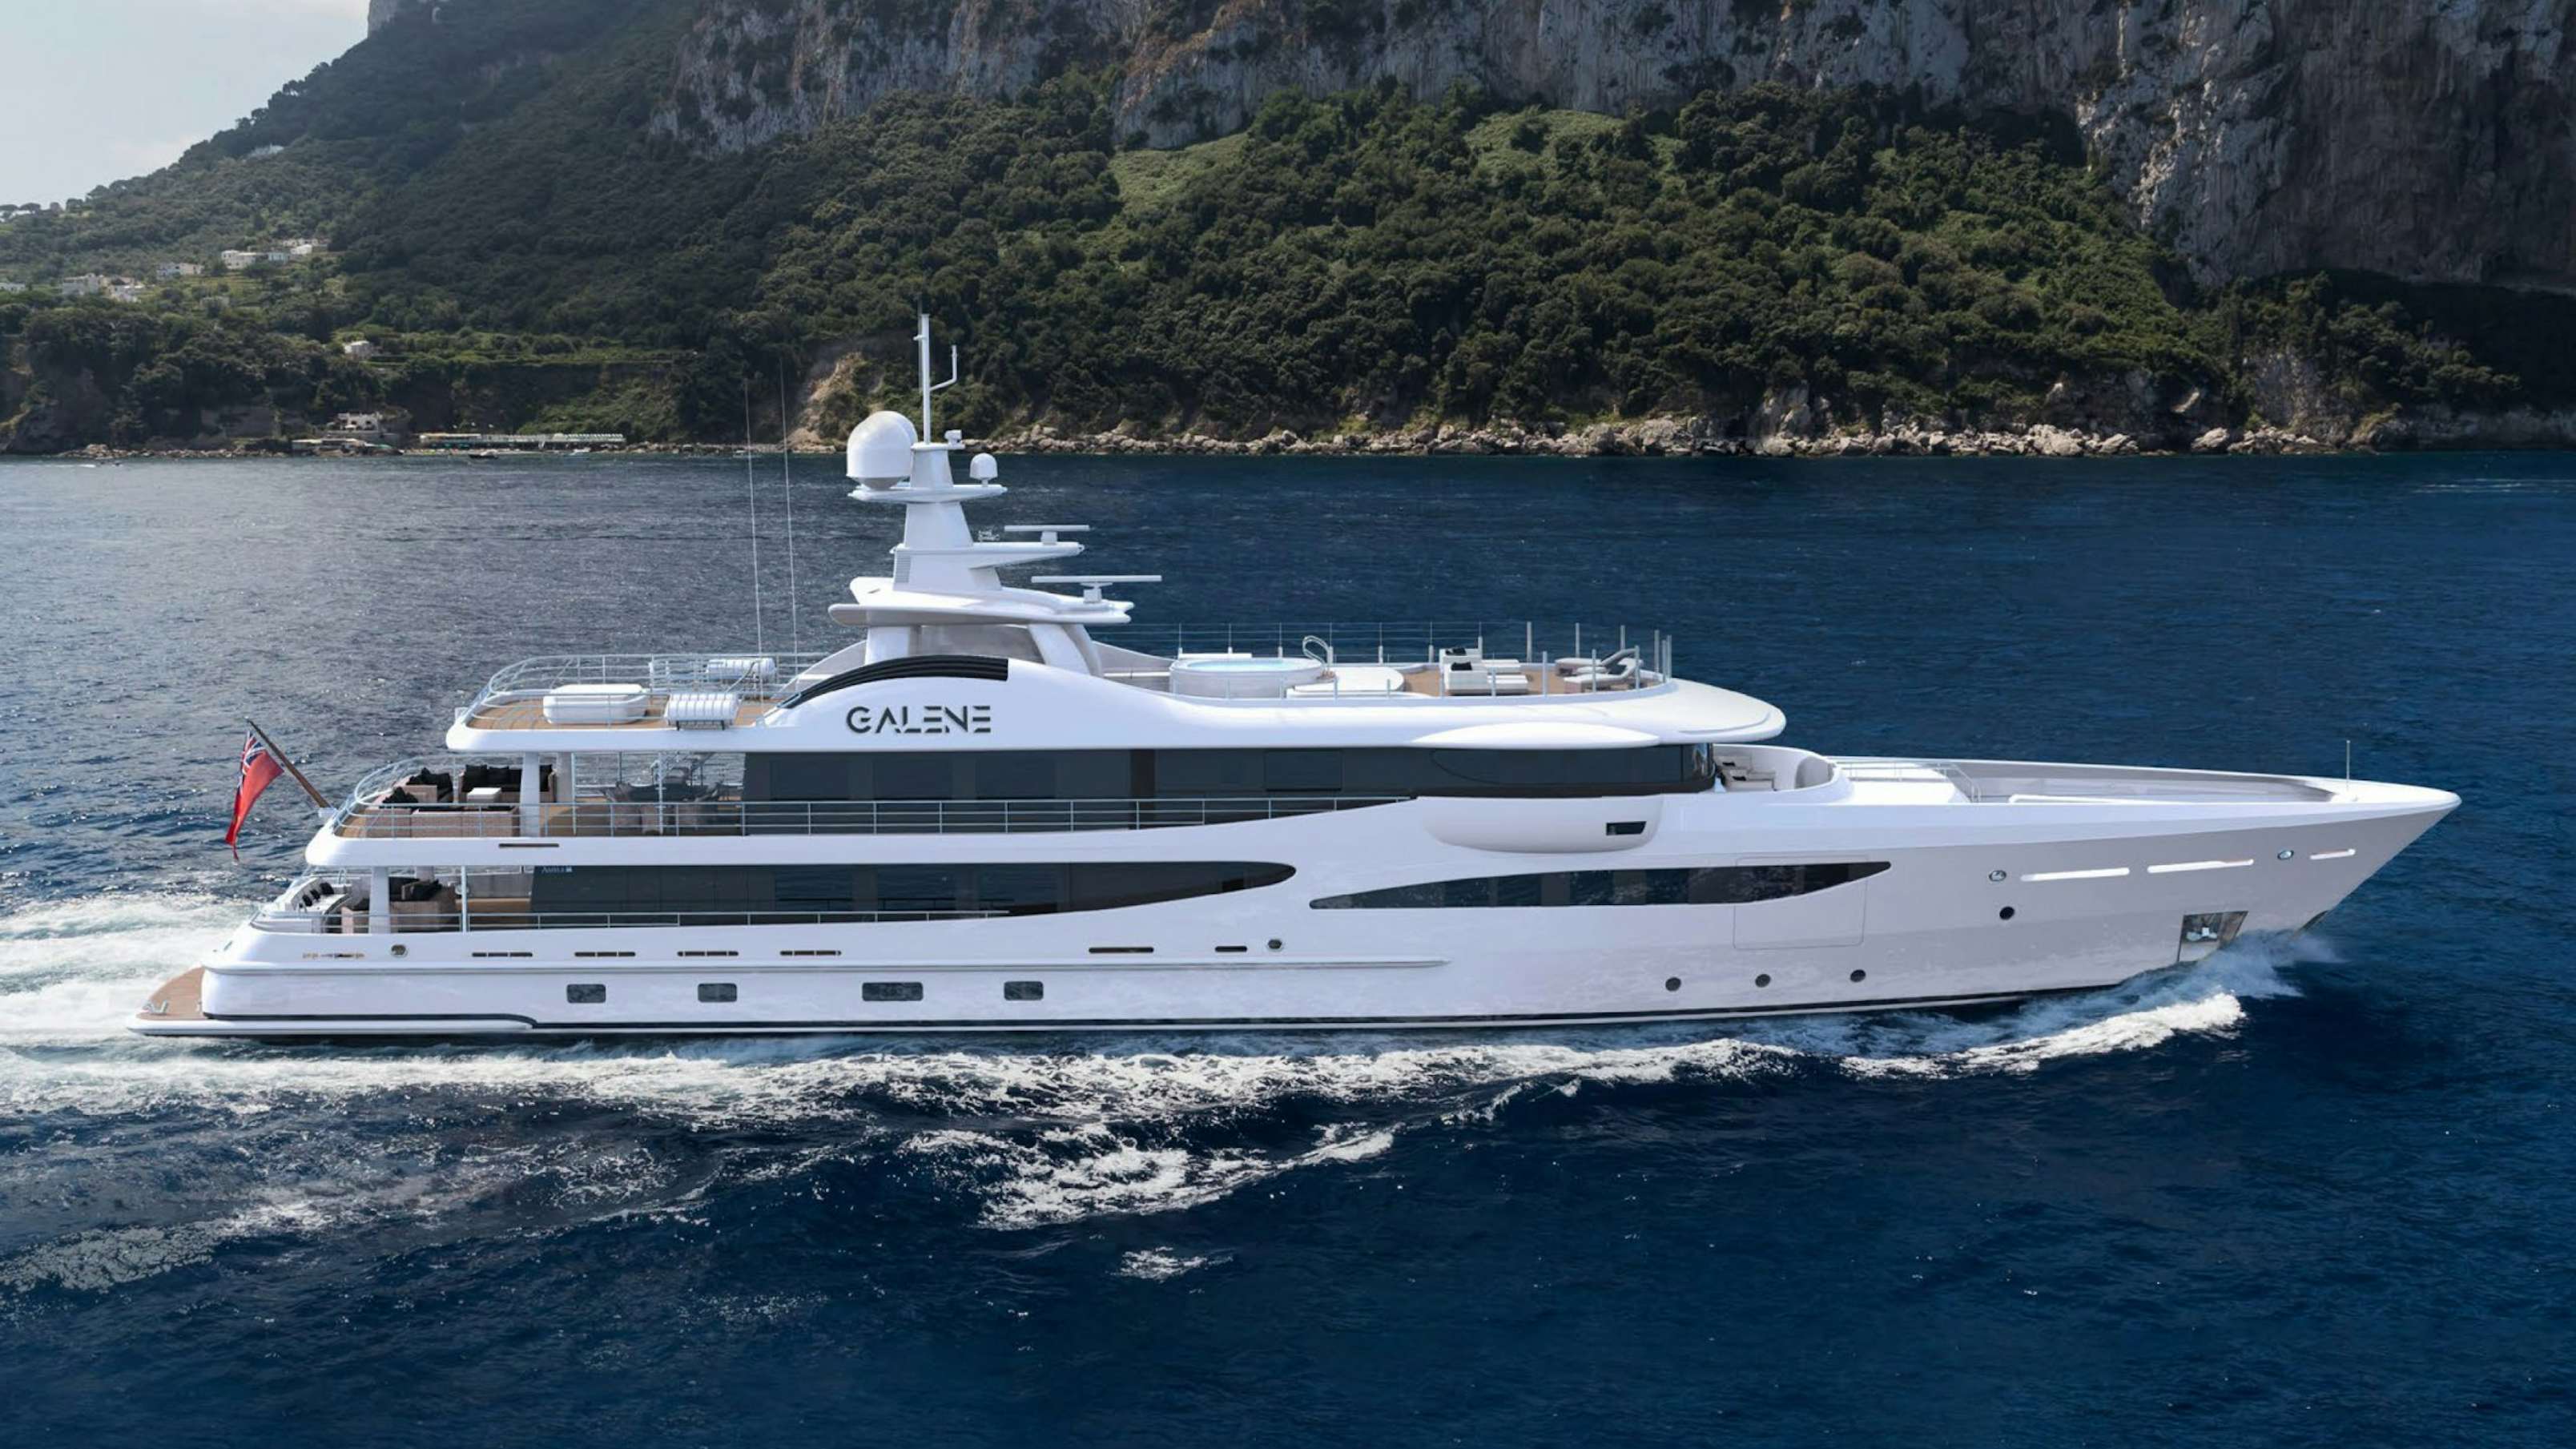 Watch Video for GALENE Yacht for Charter